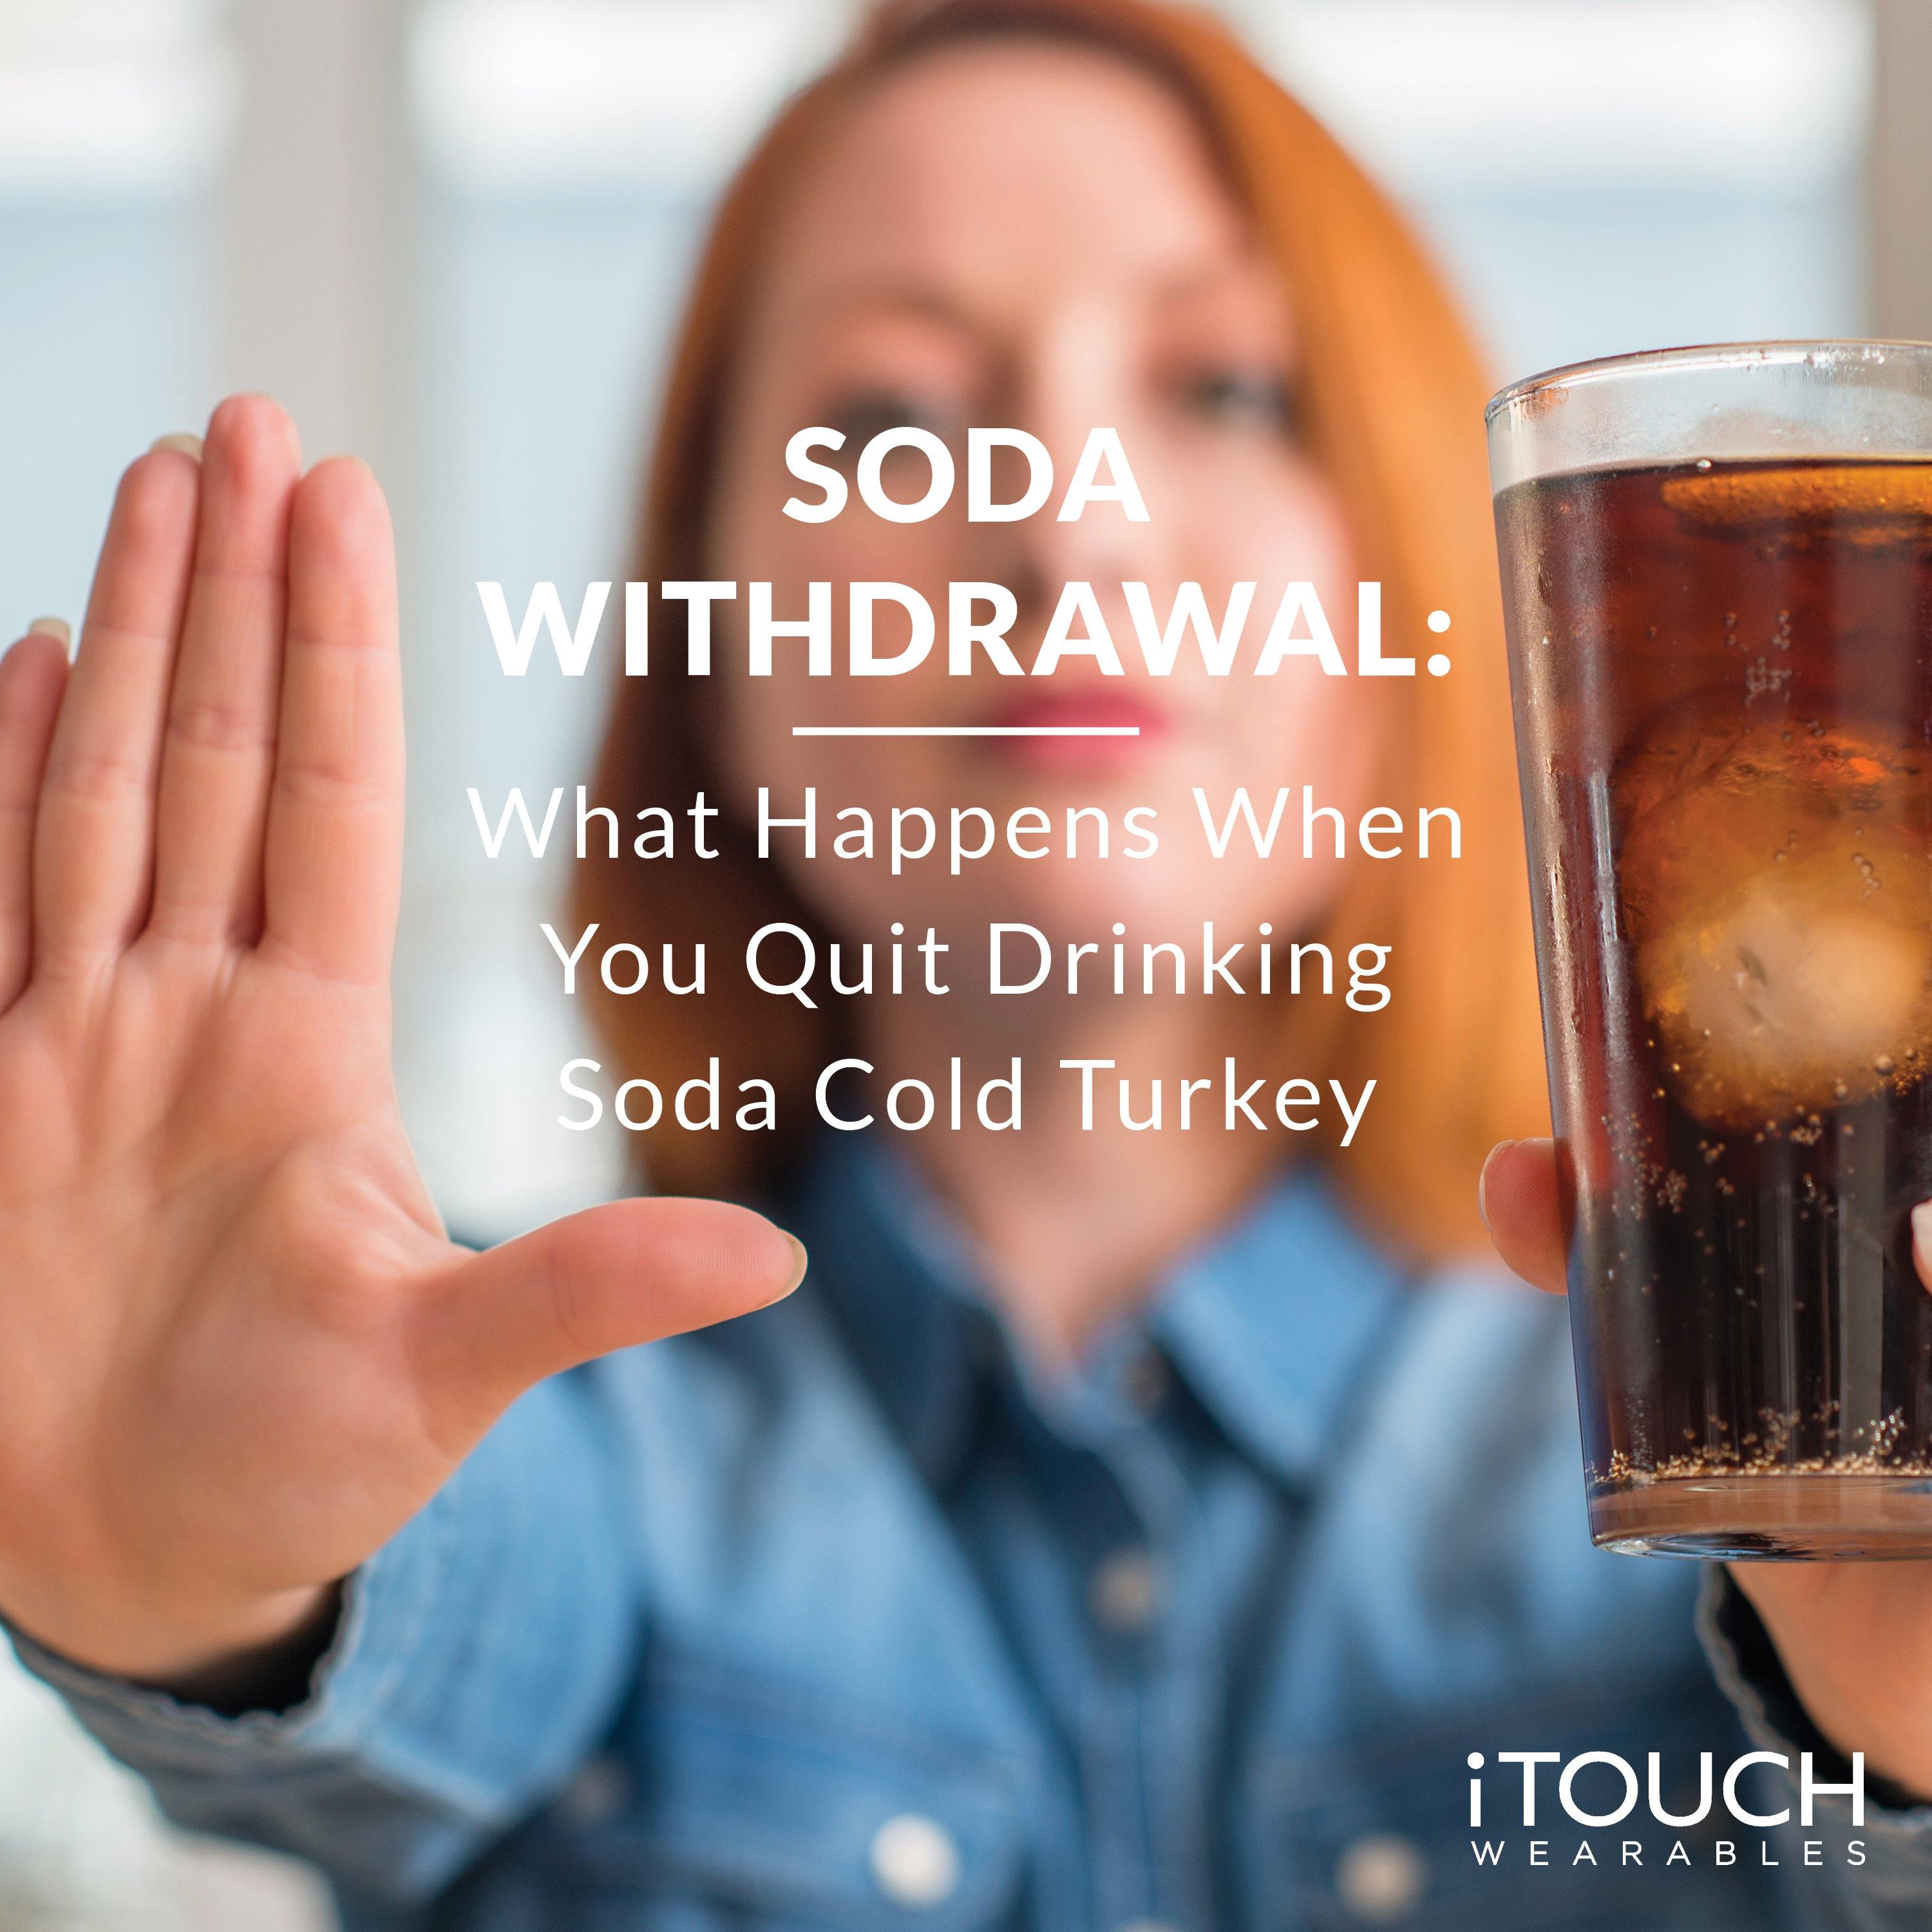 Soda Withdrawal: What Happens When You Quit Drinking Soda Cold Turkey - iTOUCH Wearables